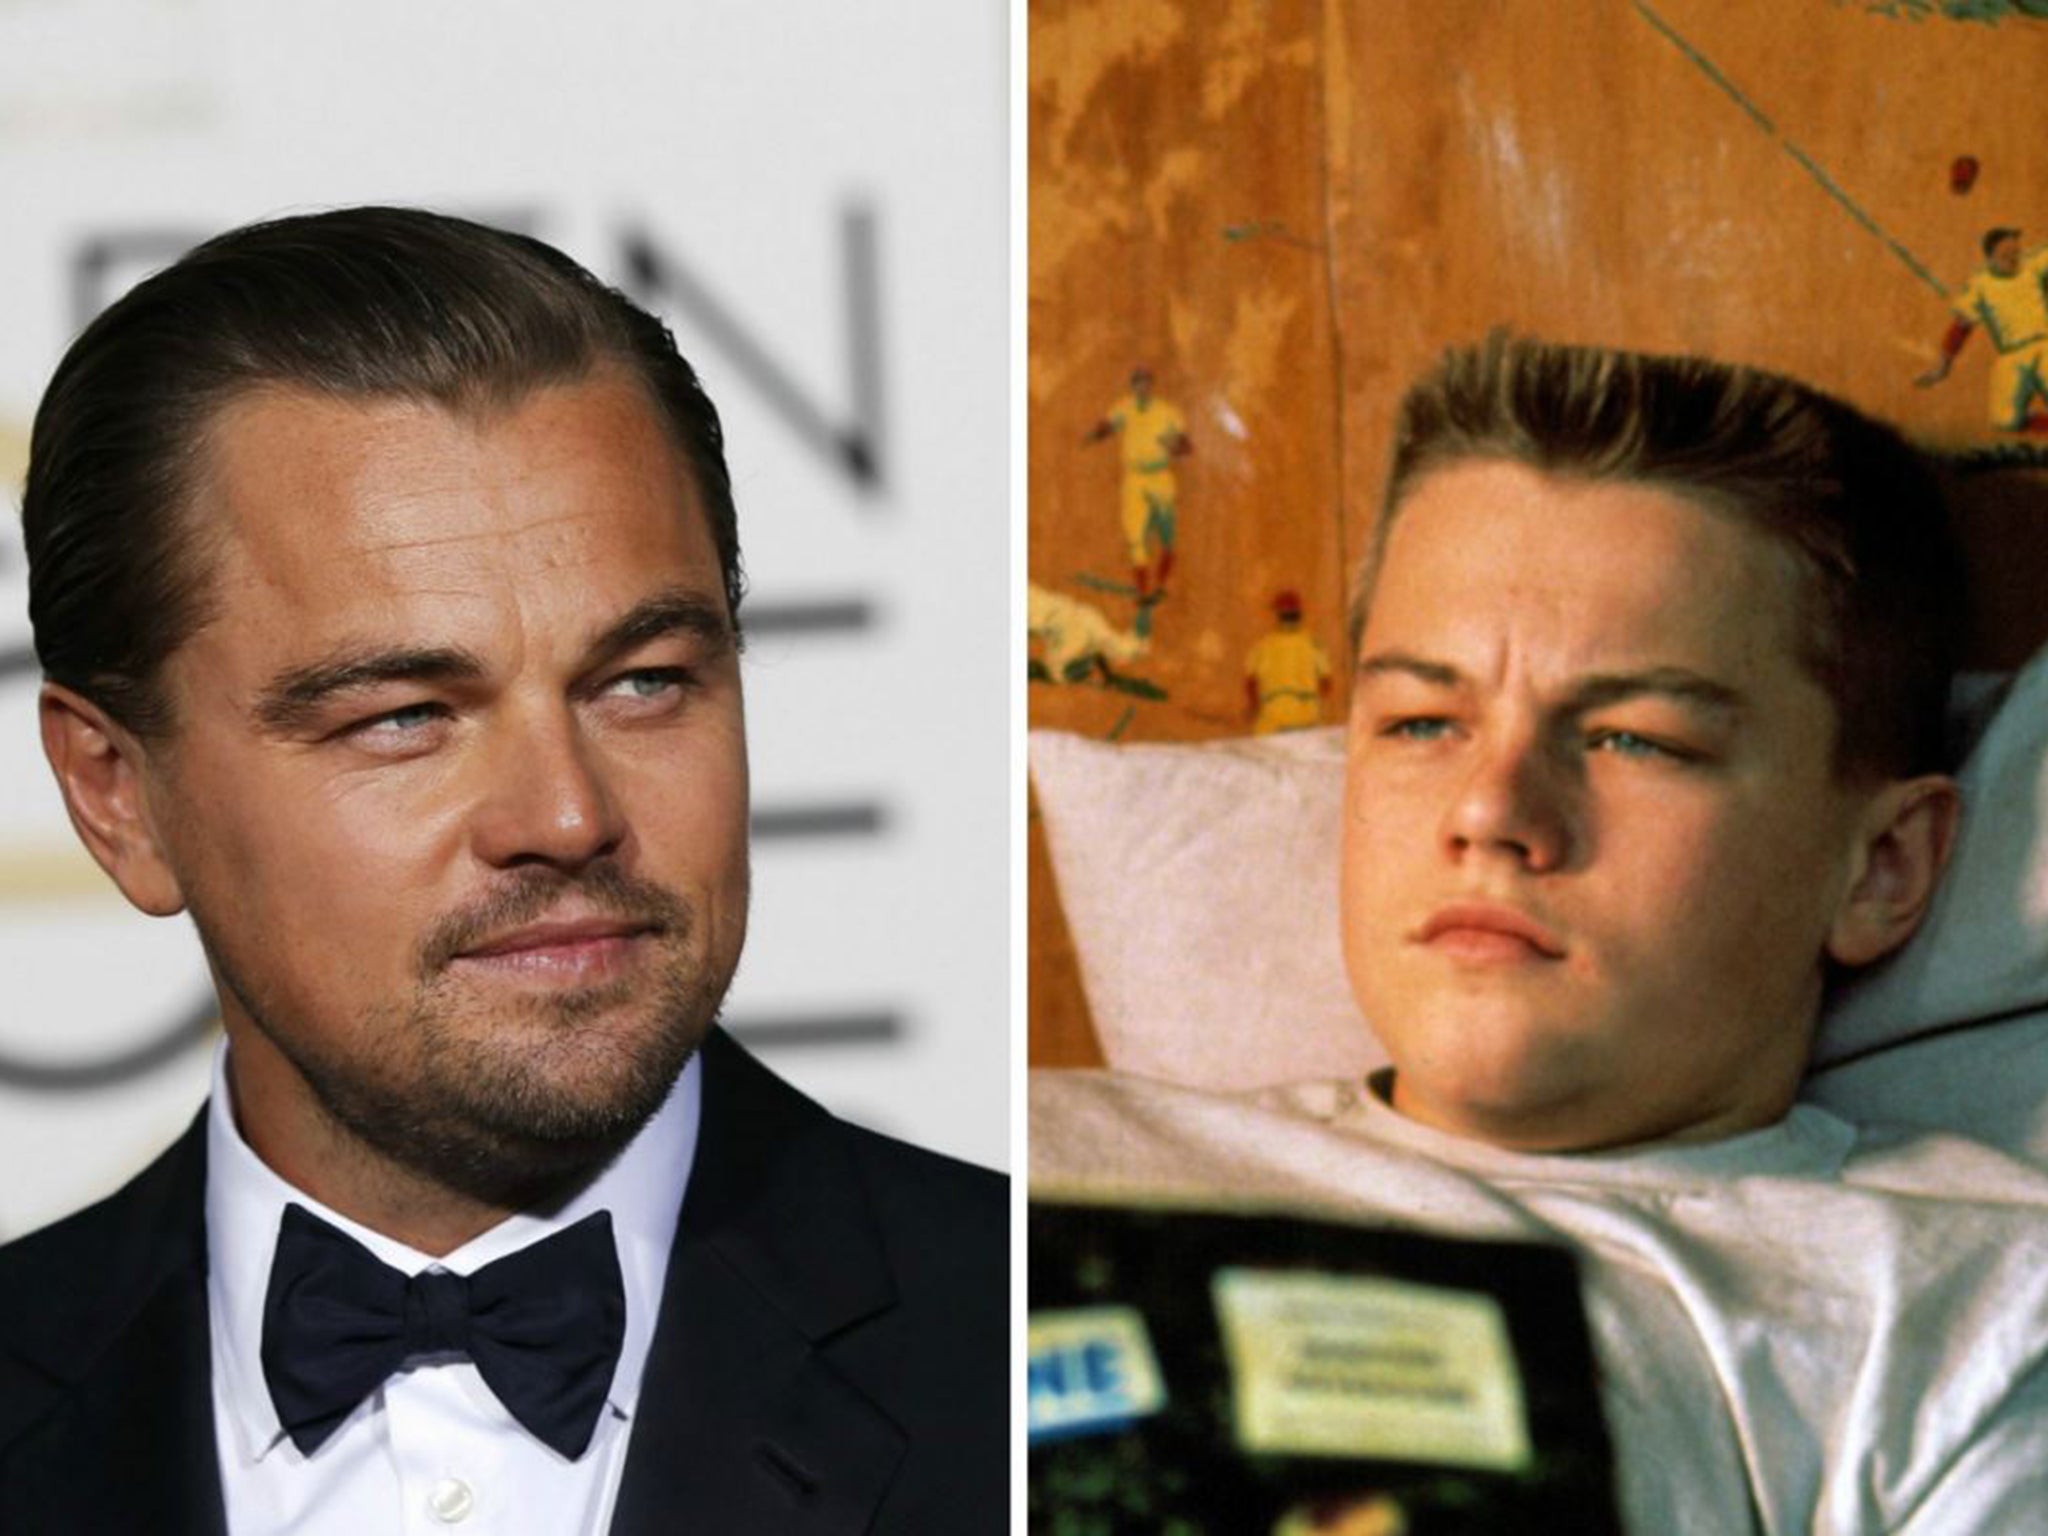 Leonardo DiCaprio at the 2016 Golden Globe, left, and in "This Boy's Life" in 1993